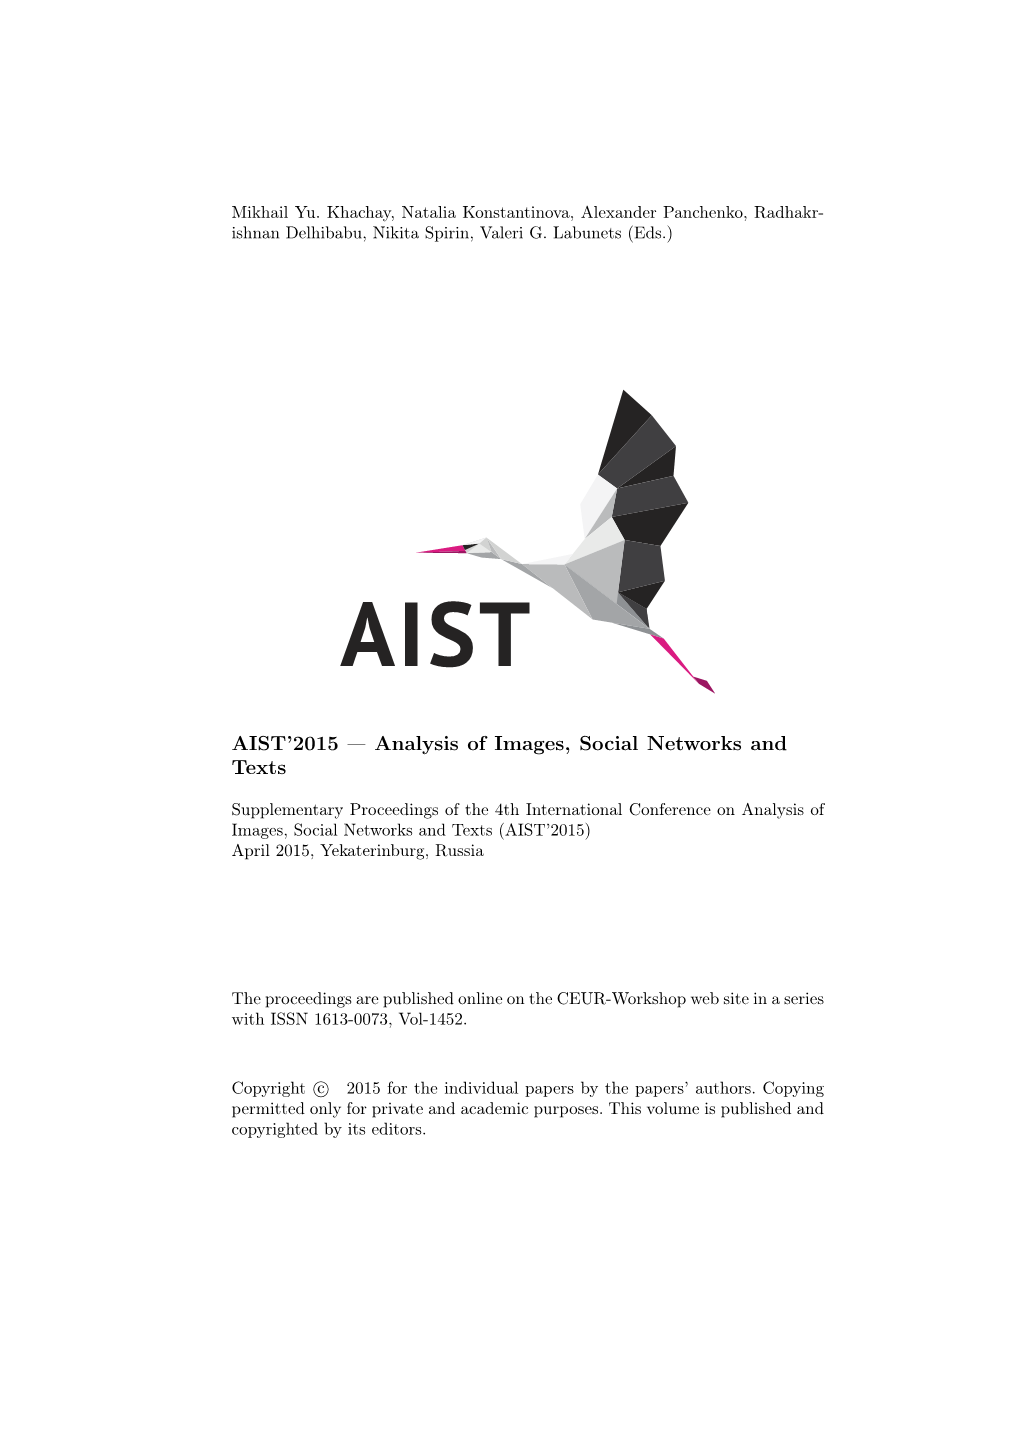 AIST'2015 Analysis of Images, Social Networks and Texts